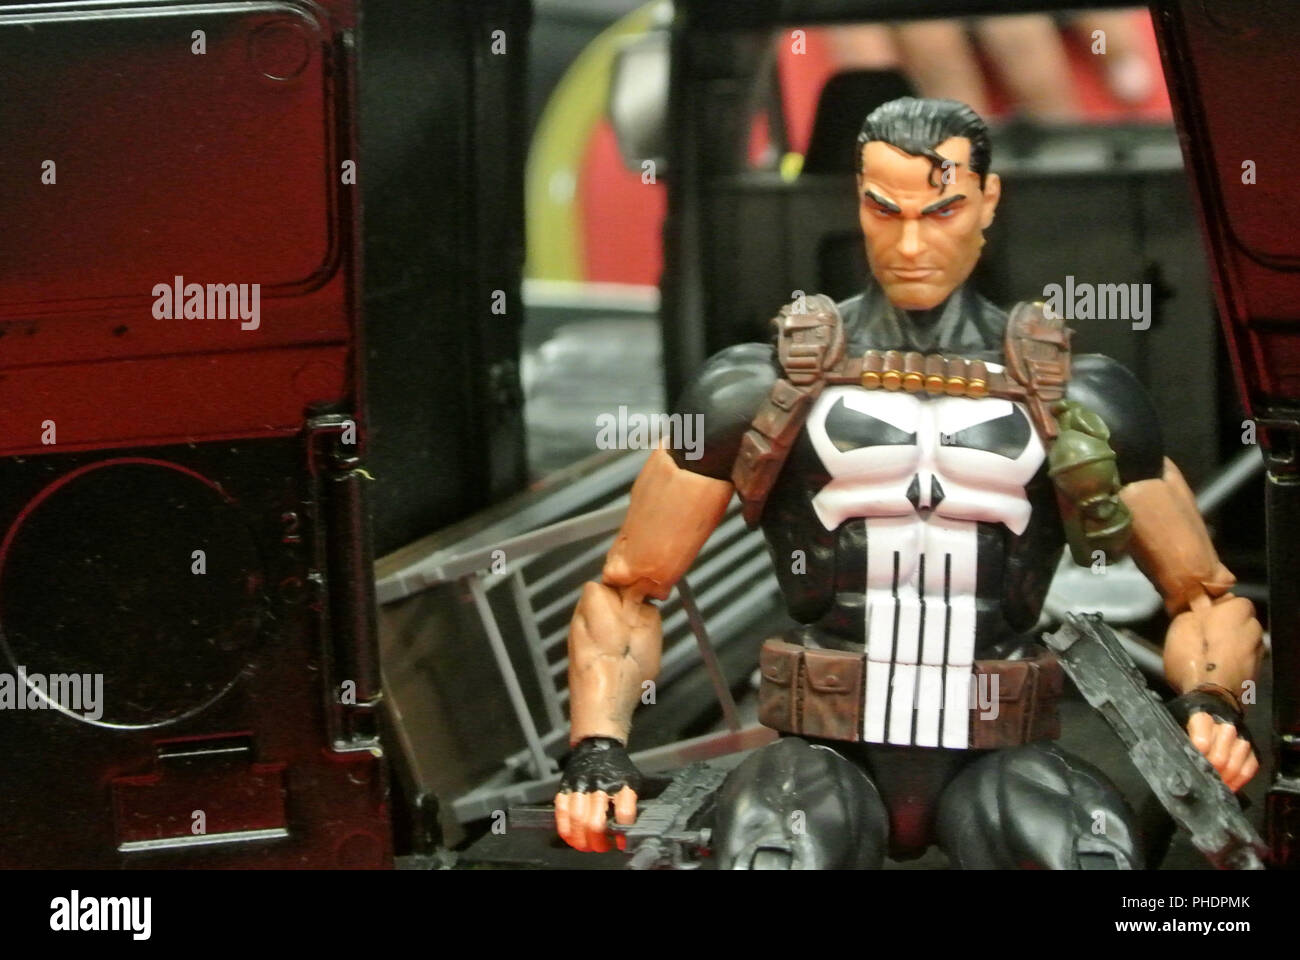 Fiction character of PUNISHER from MARVEL movies and comic. PUNISHER action figure toys in various size display for the public. Stock Photo